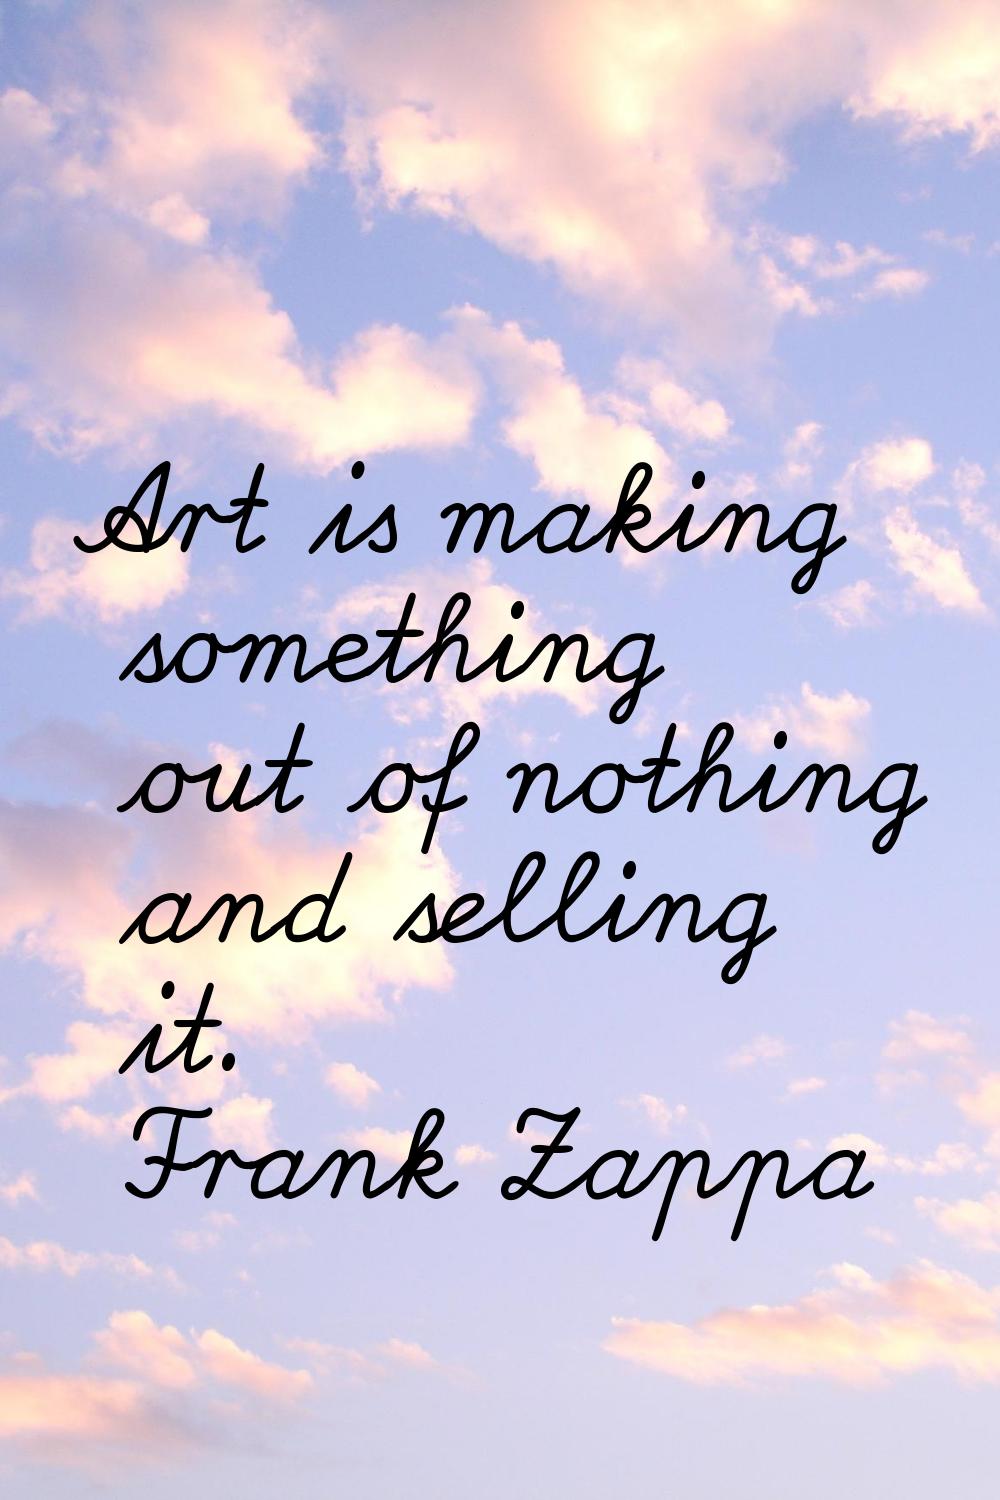 Art is making something out of nothing and selling it.